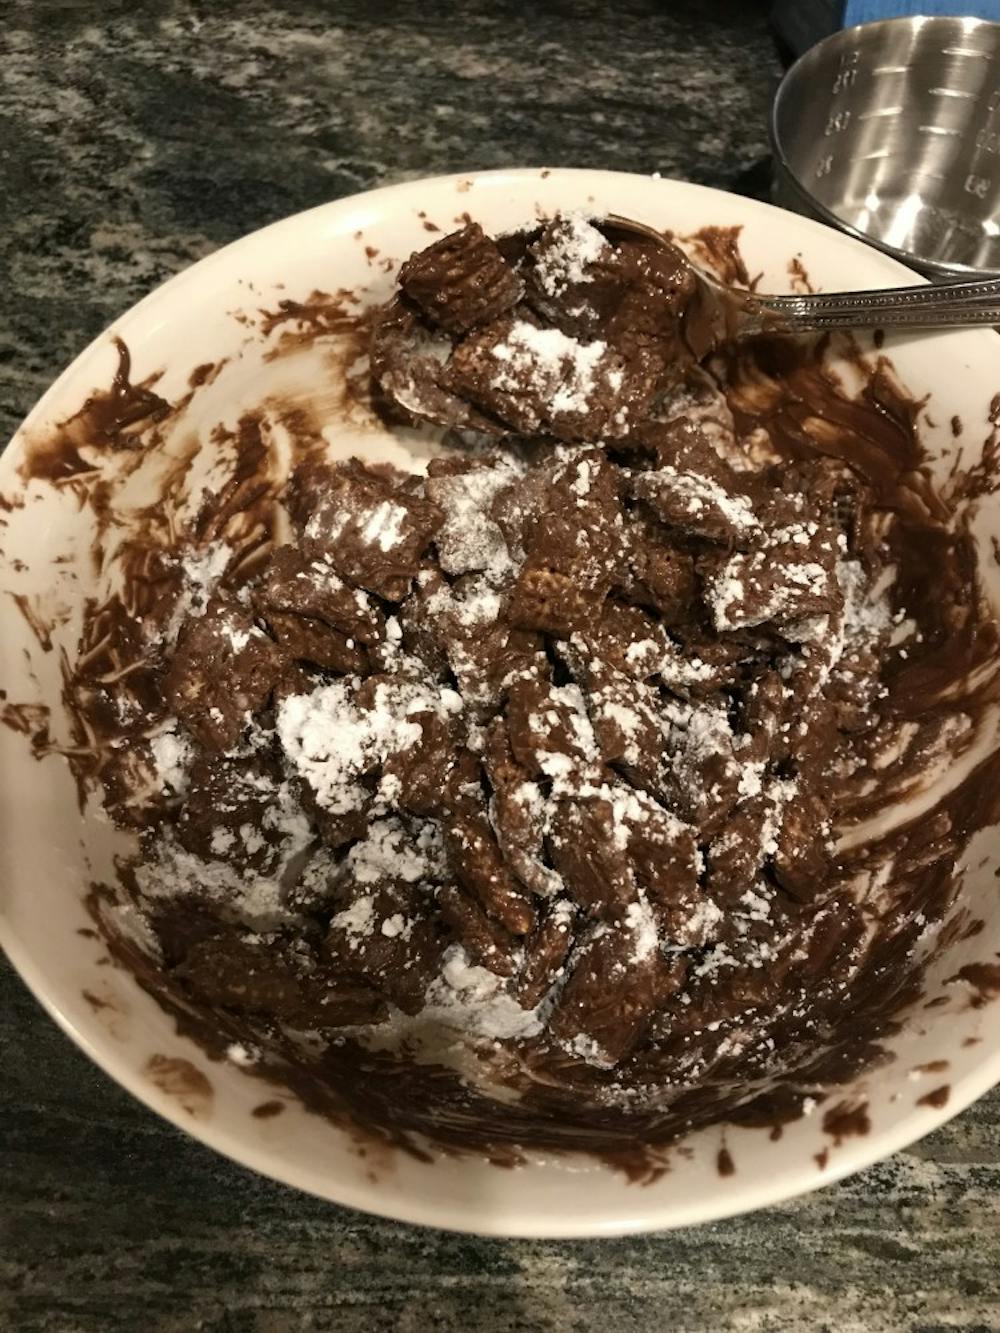 Made up of Chex cereal, chocolate, peanut butter, and powdered sugar, the Muddy Buddies recipe is easy to make from the comfort of your dorm room.